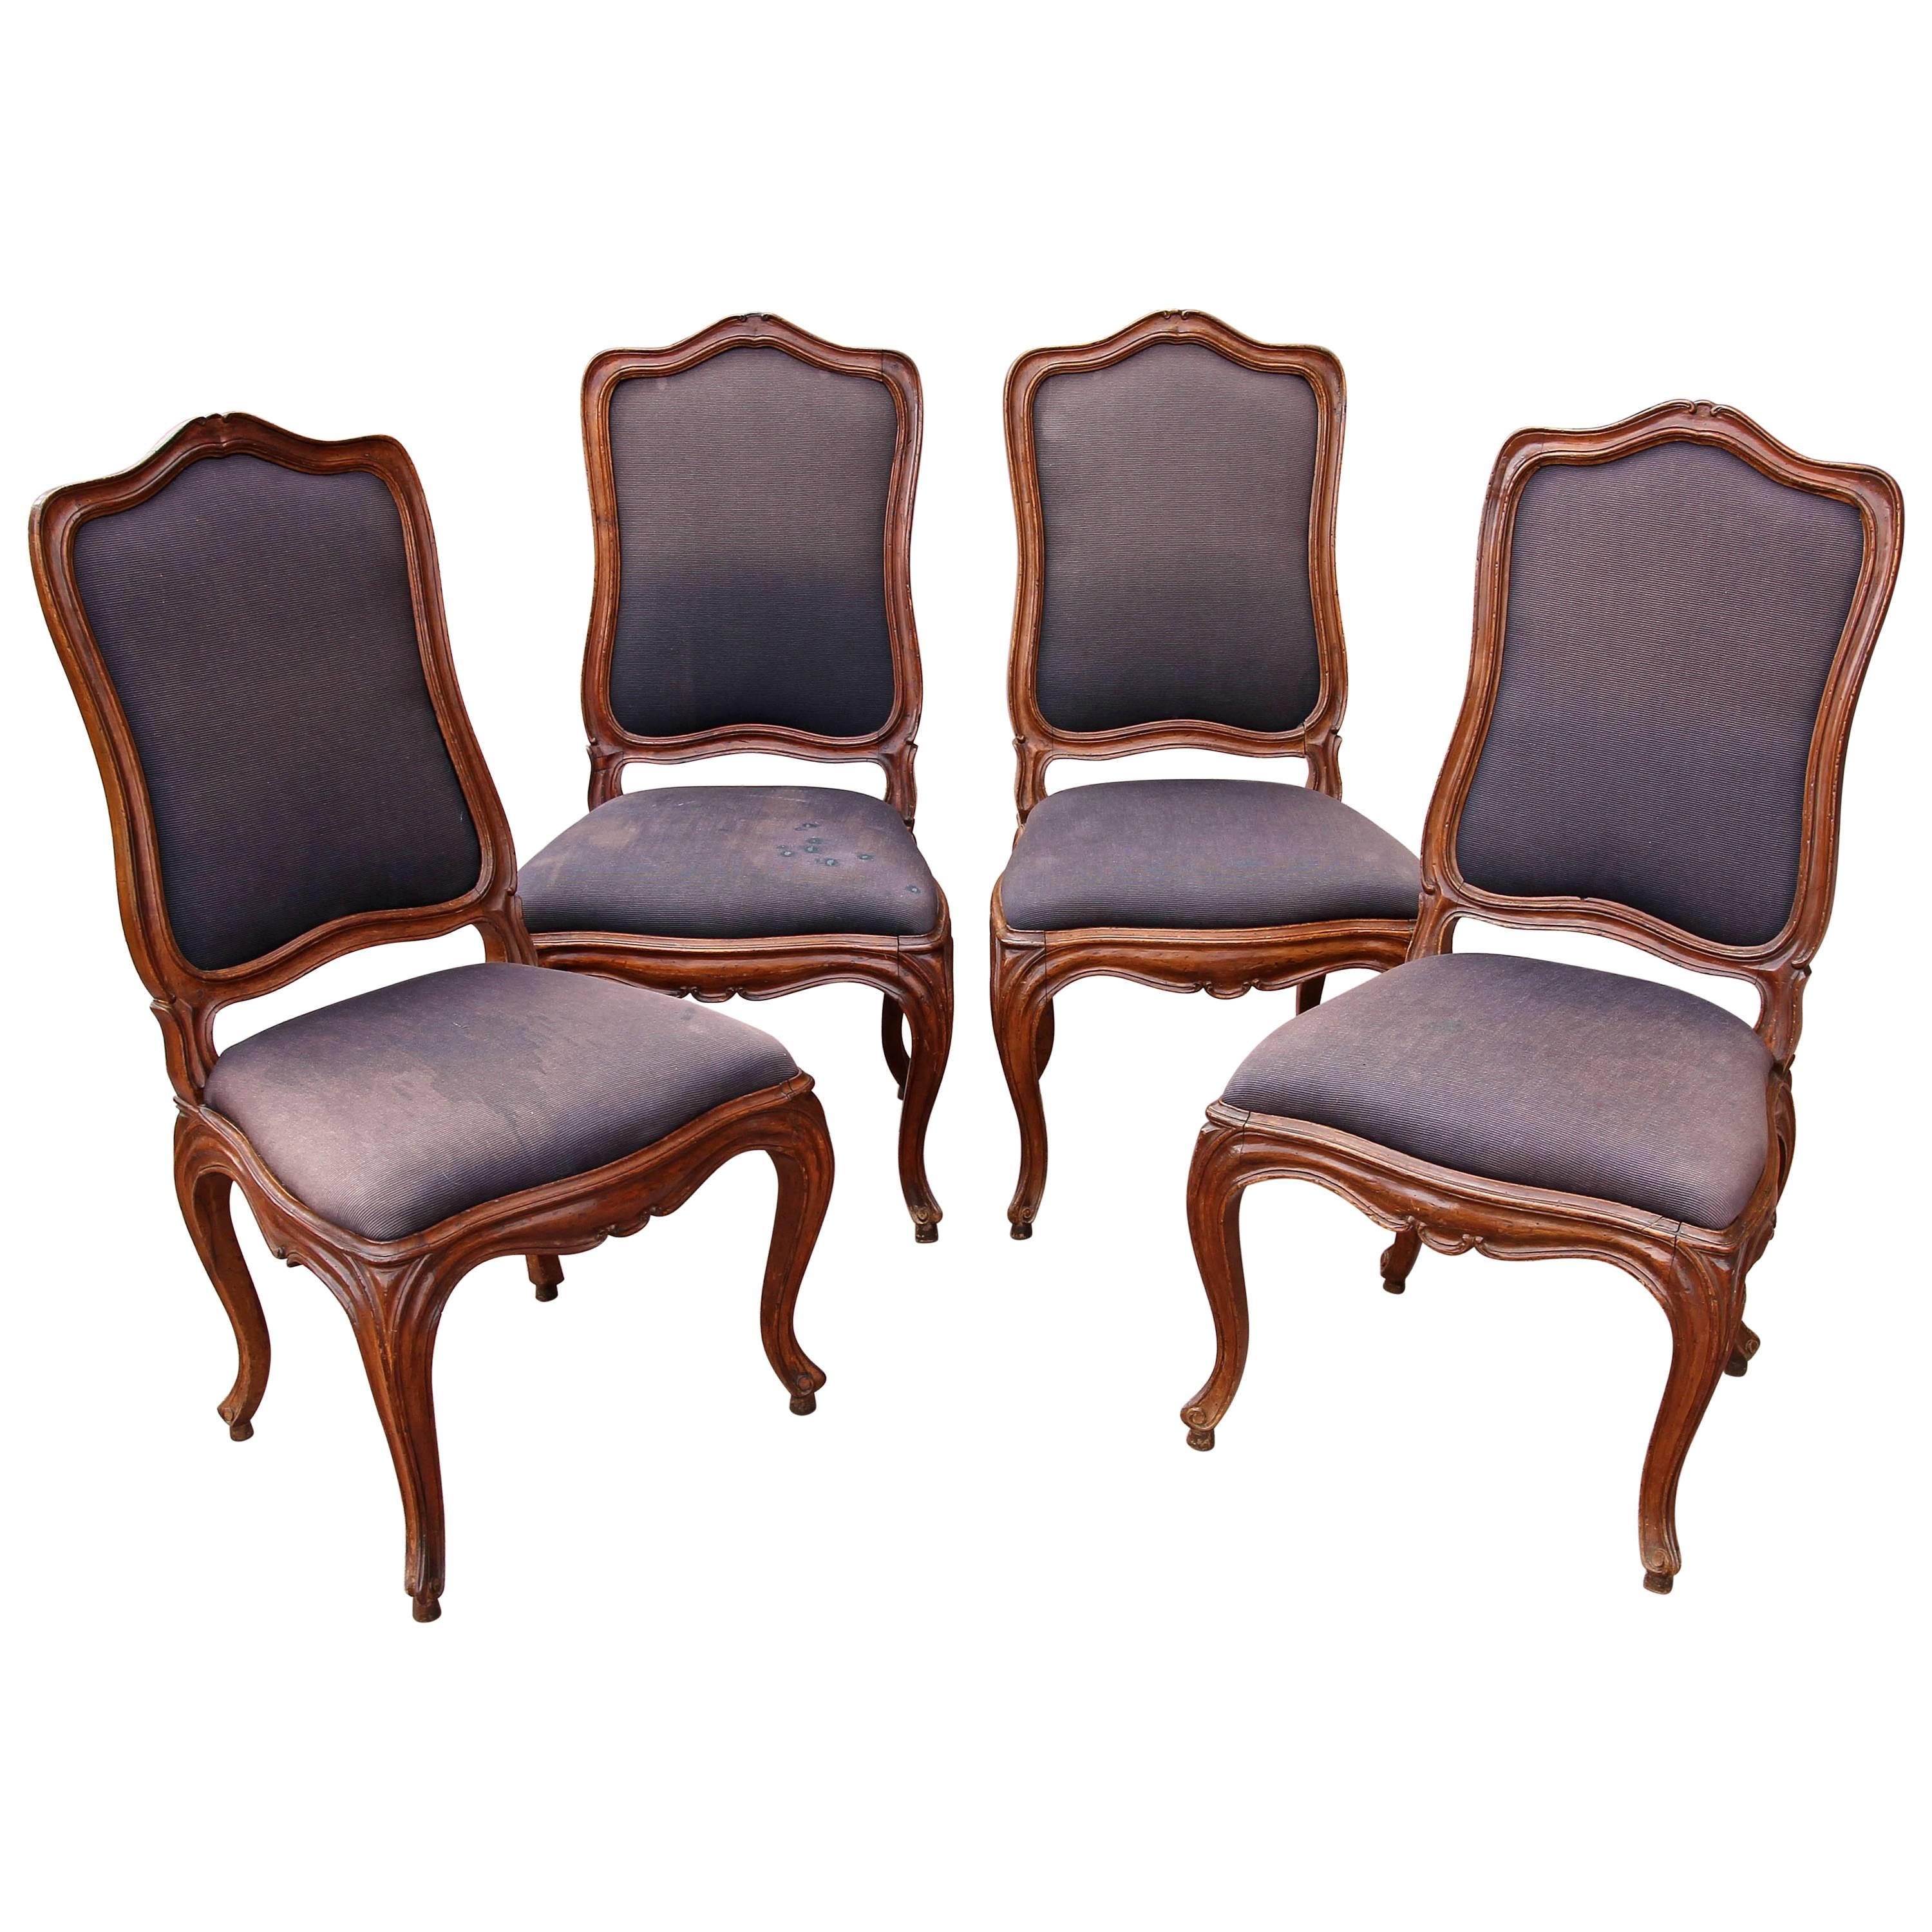 Set of Four Louis XV 18th Century Chairs